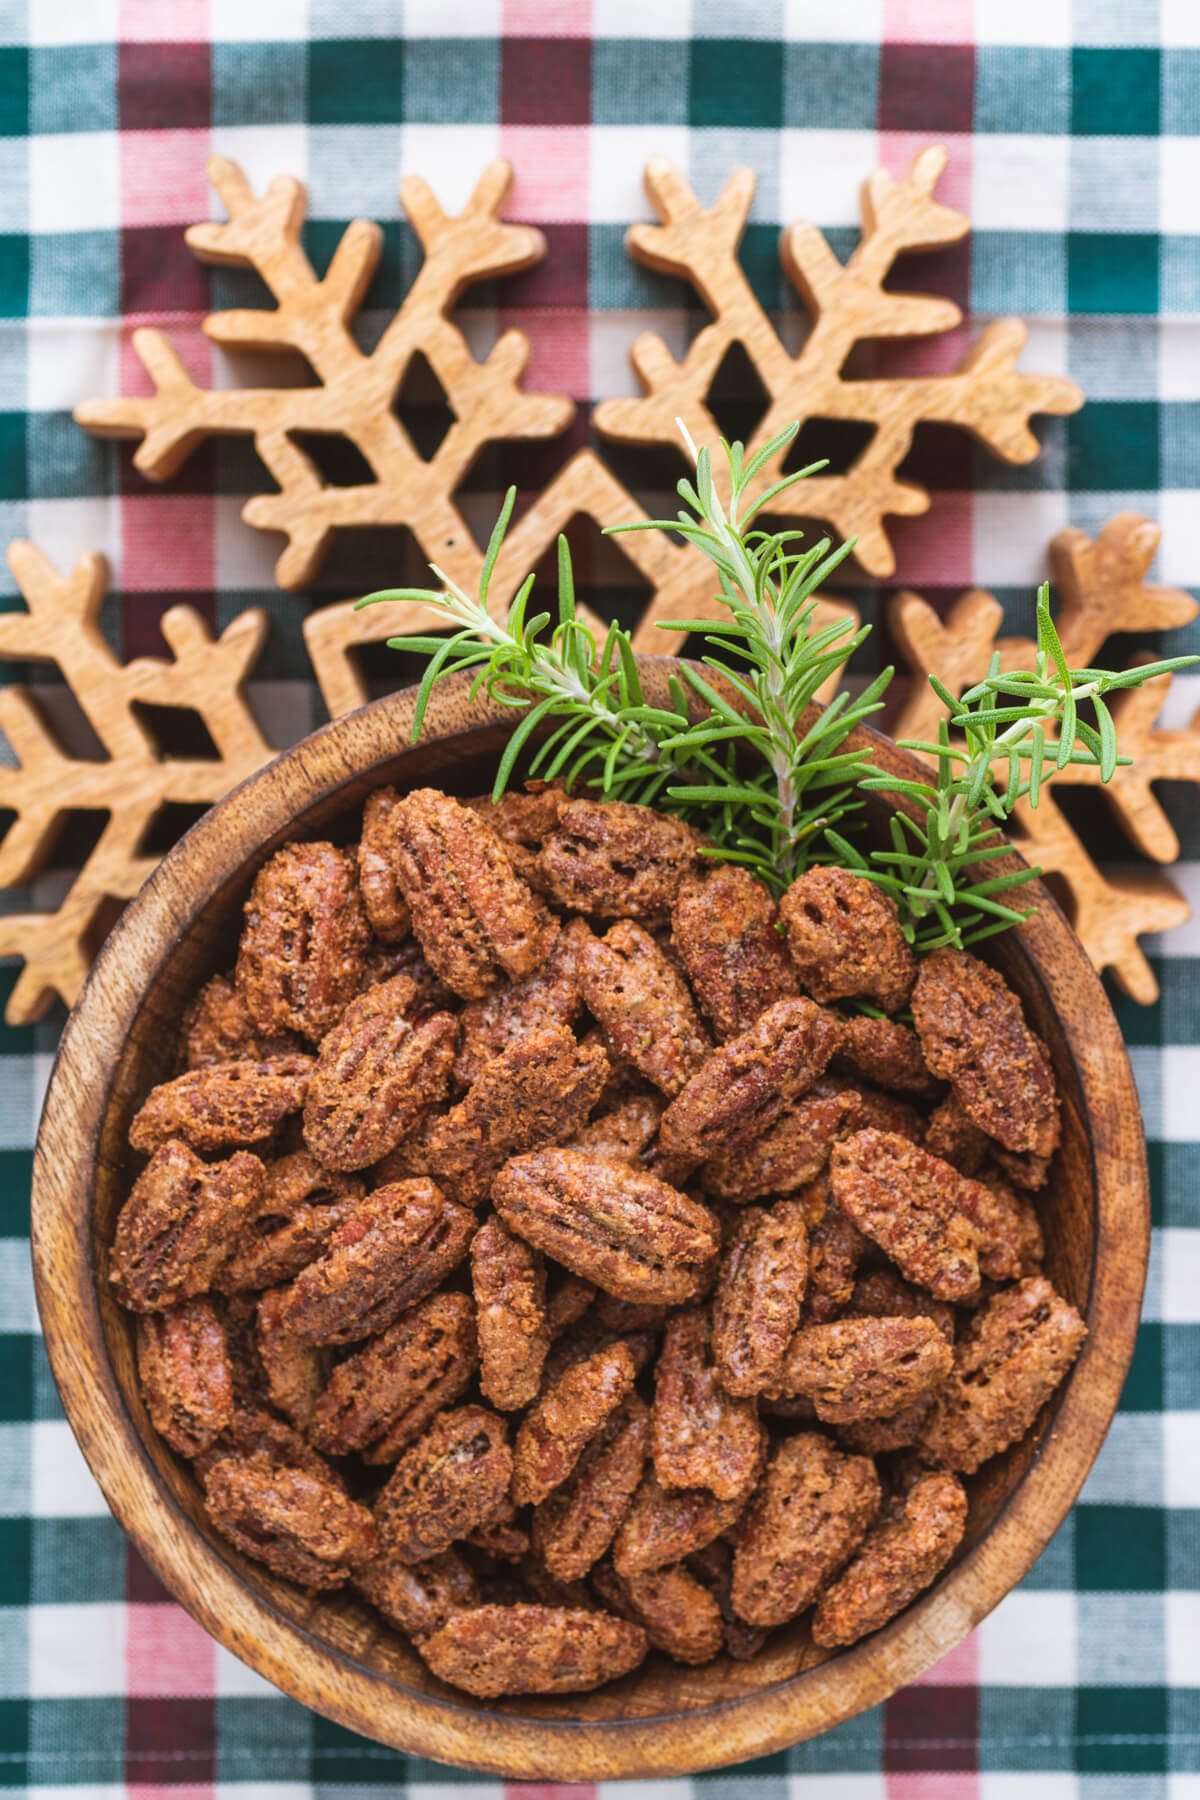 A wooden bowl filled with candied pecan halves and fresh rosemary garnish sits on a wooden snowflake trivet.